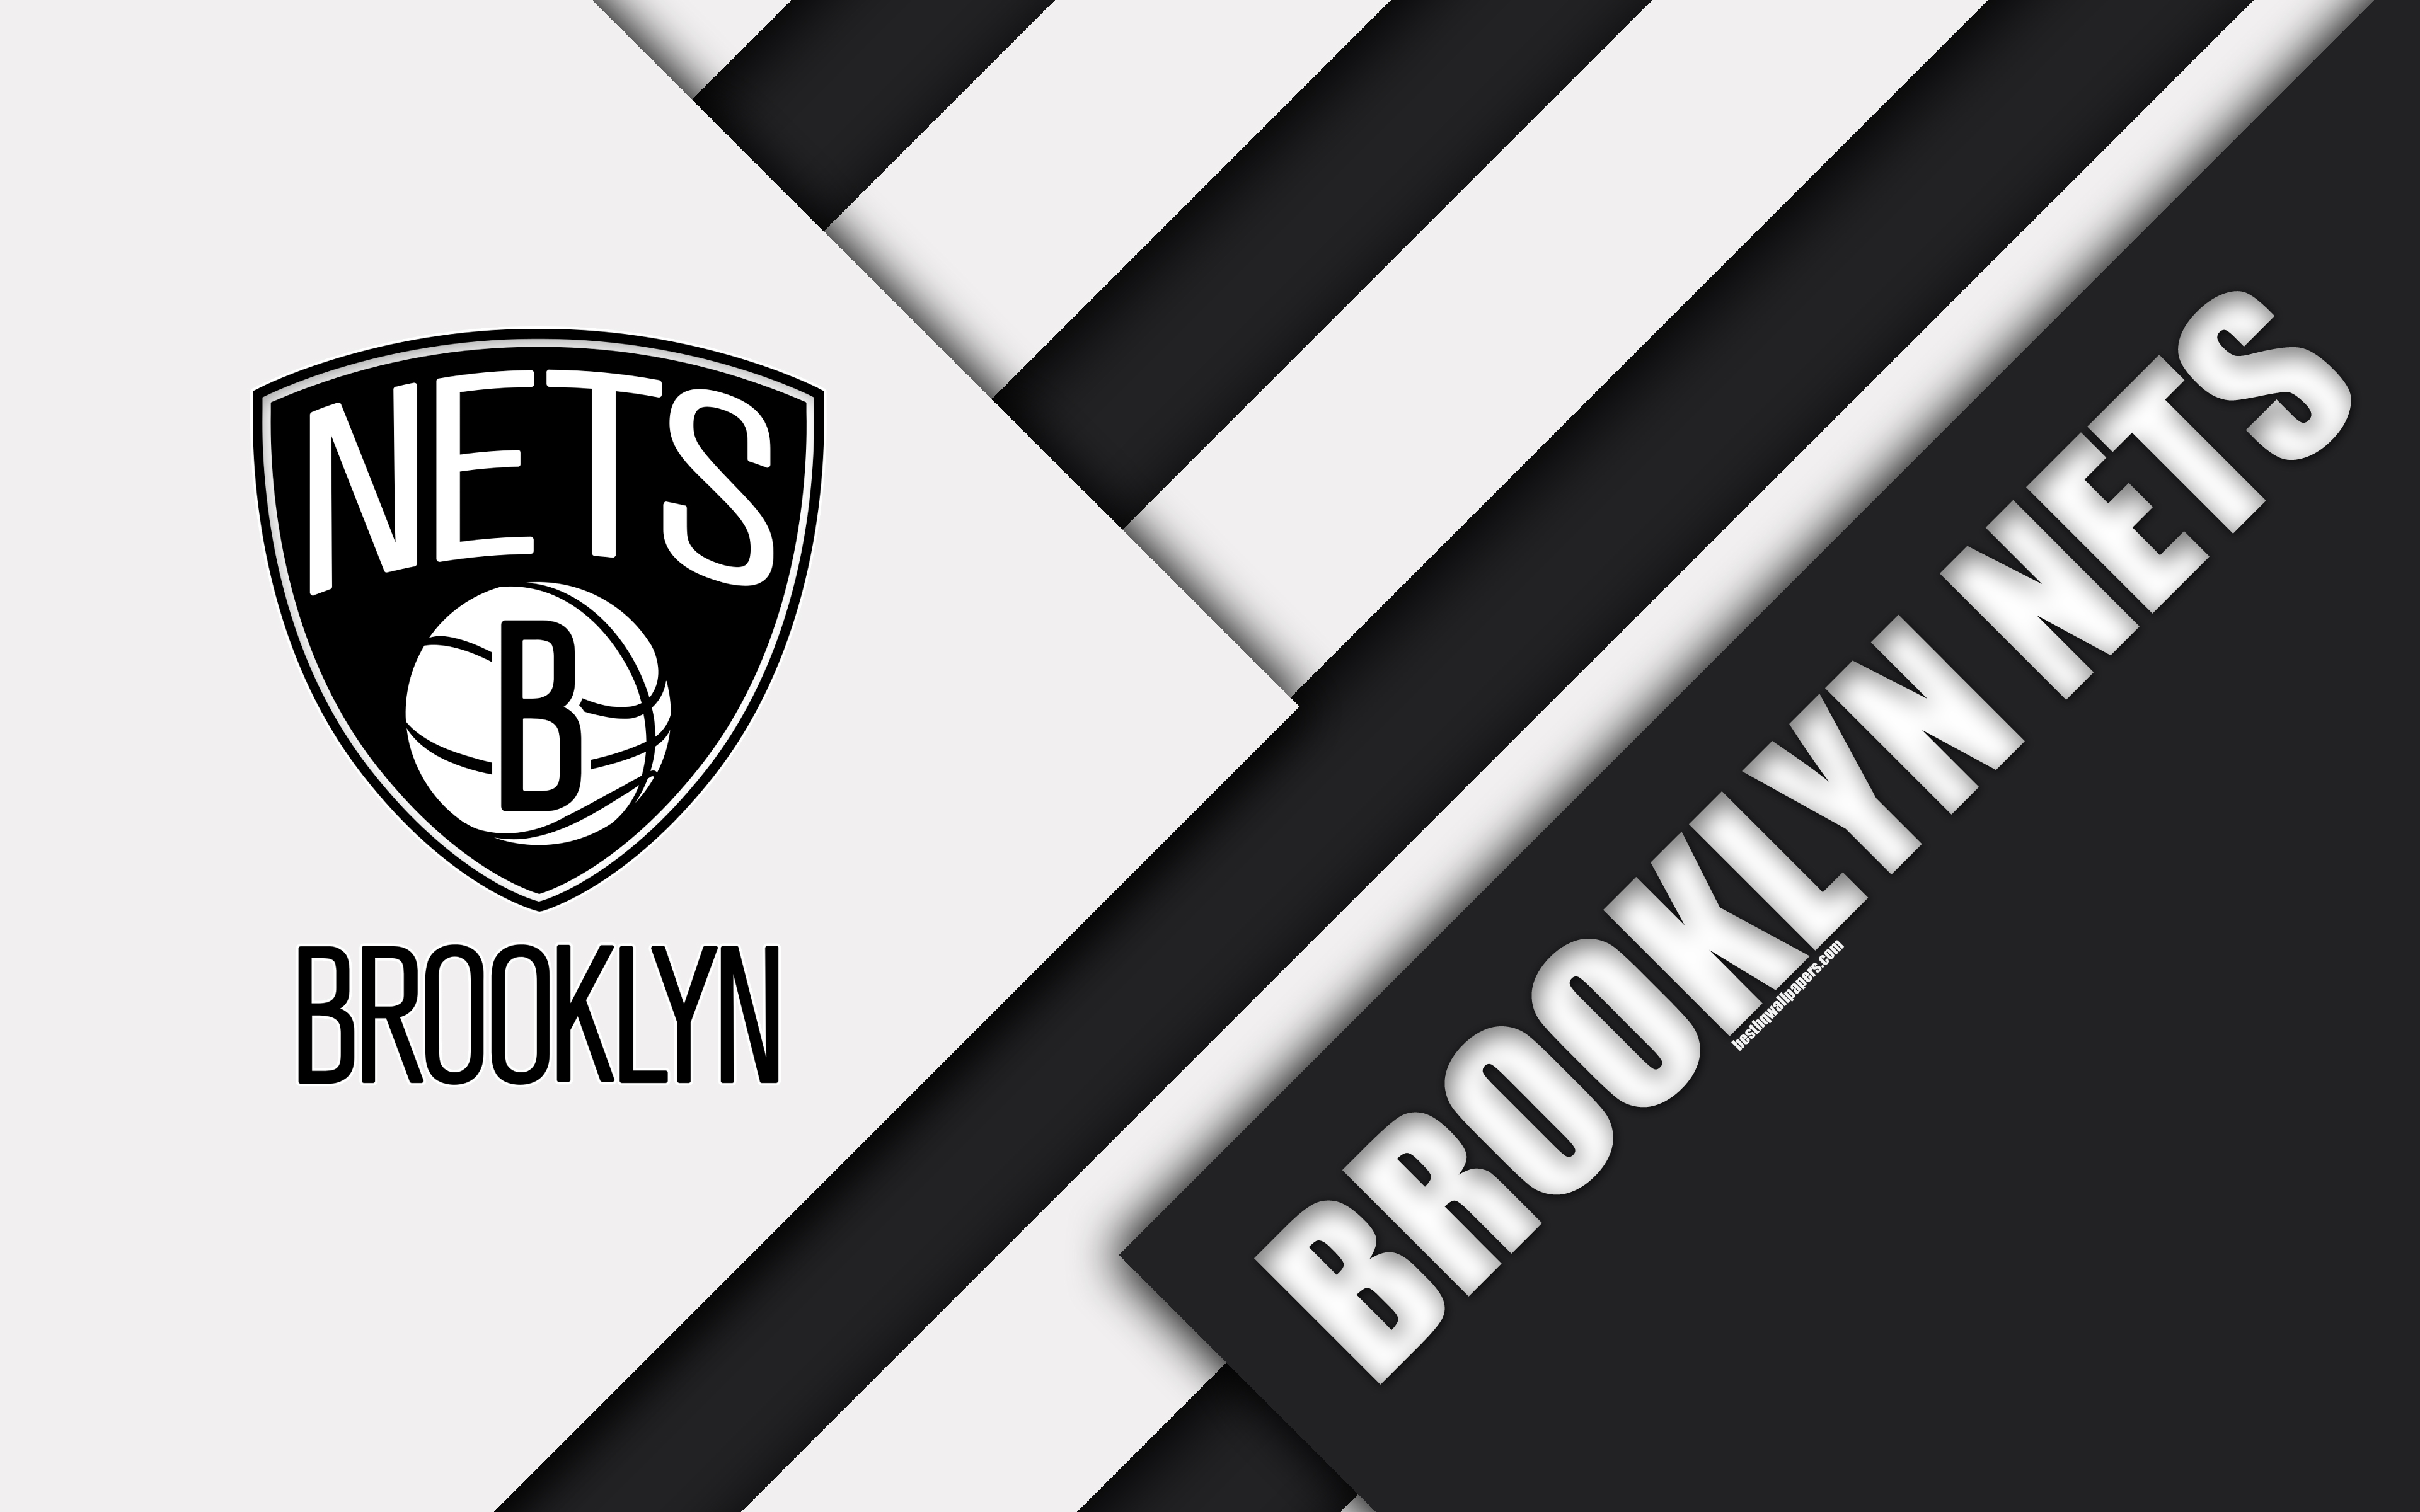 Download wallpaper Brooklyn Nets, 4k, logo, material design, American basketball club, black and white abstraction, NBA, Brooklyn, New York, USA, basketball for desktop with resolution 3840x2400. High Quality HD picture wallpaper